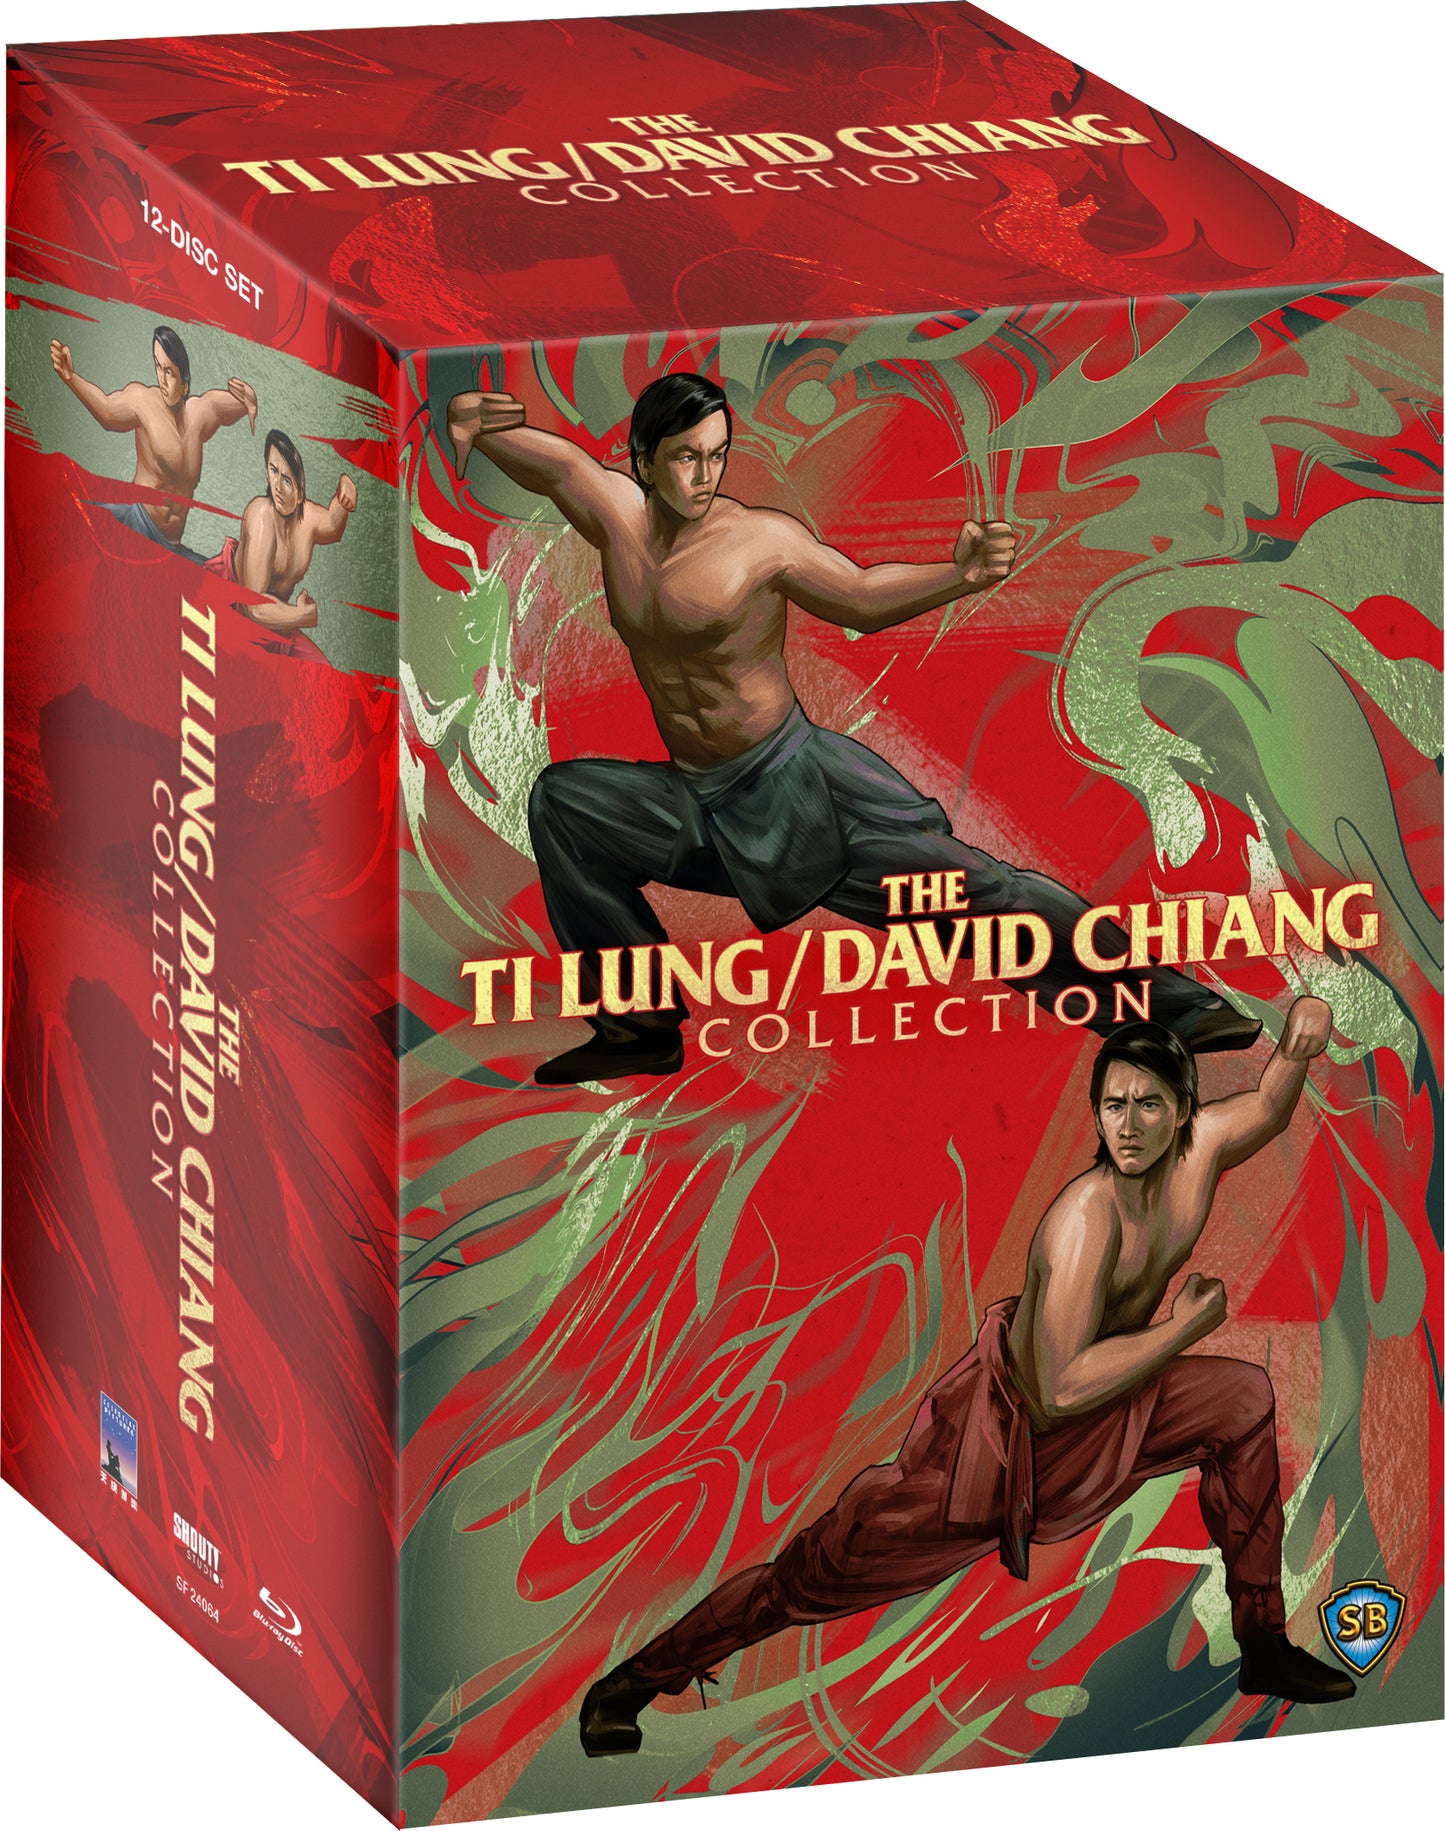 The Ti Lung / David Chiang Collection: Limited Editon (Exclusive)